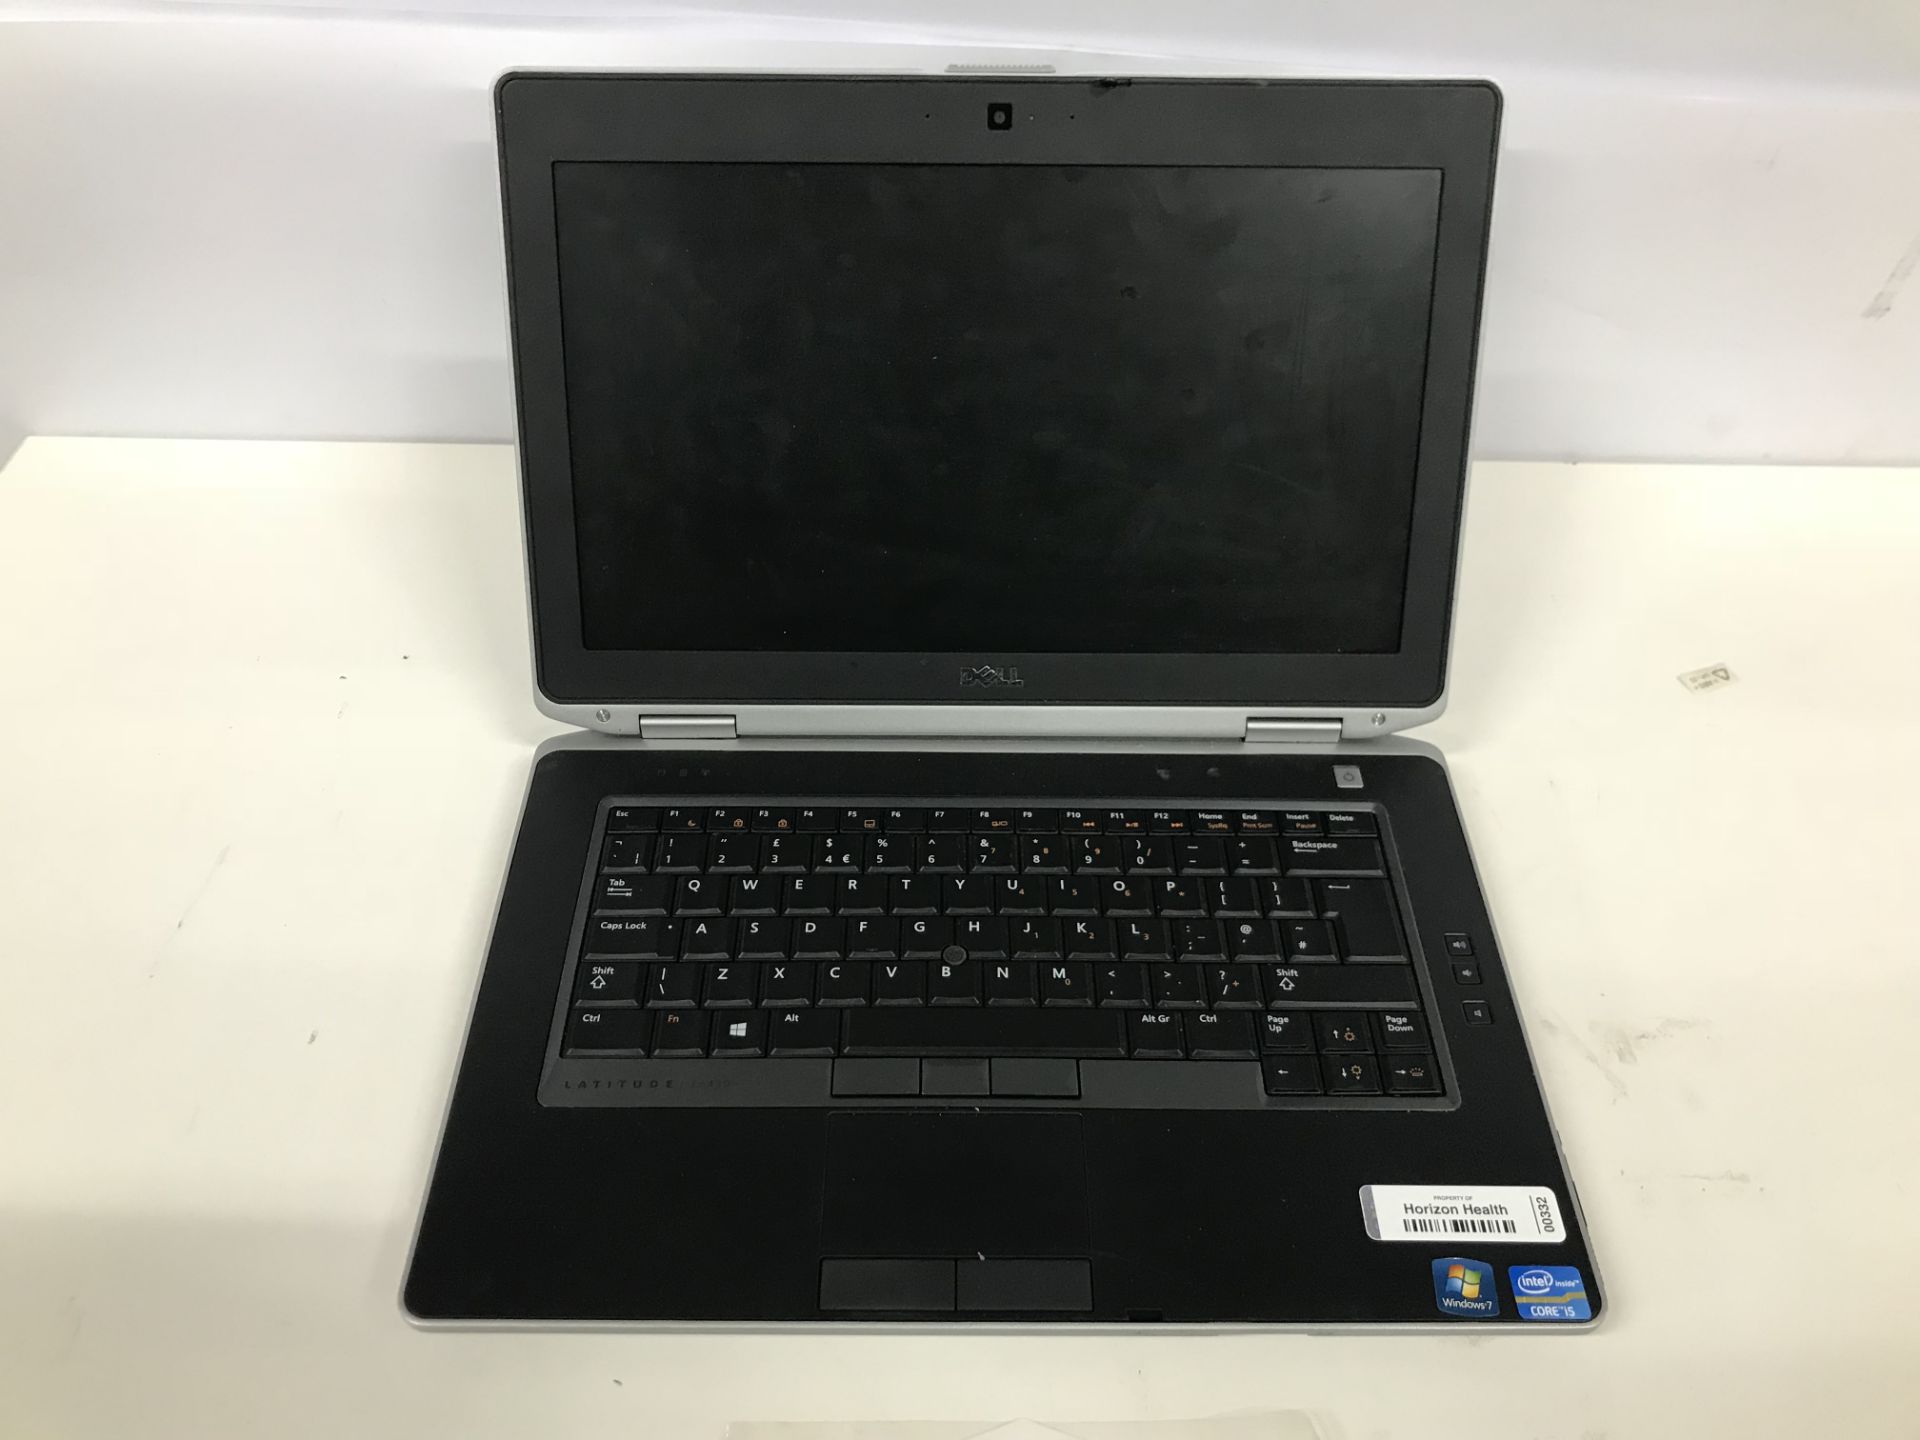 Dell Latitude Intel Core i5 Laptop (No charger) - Image 2 of 2